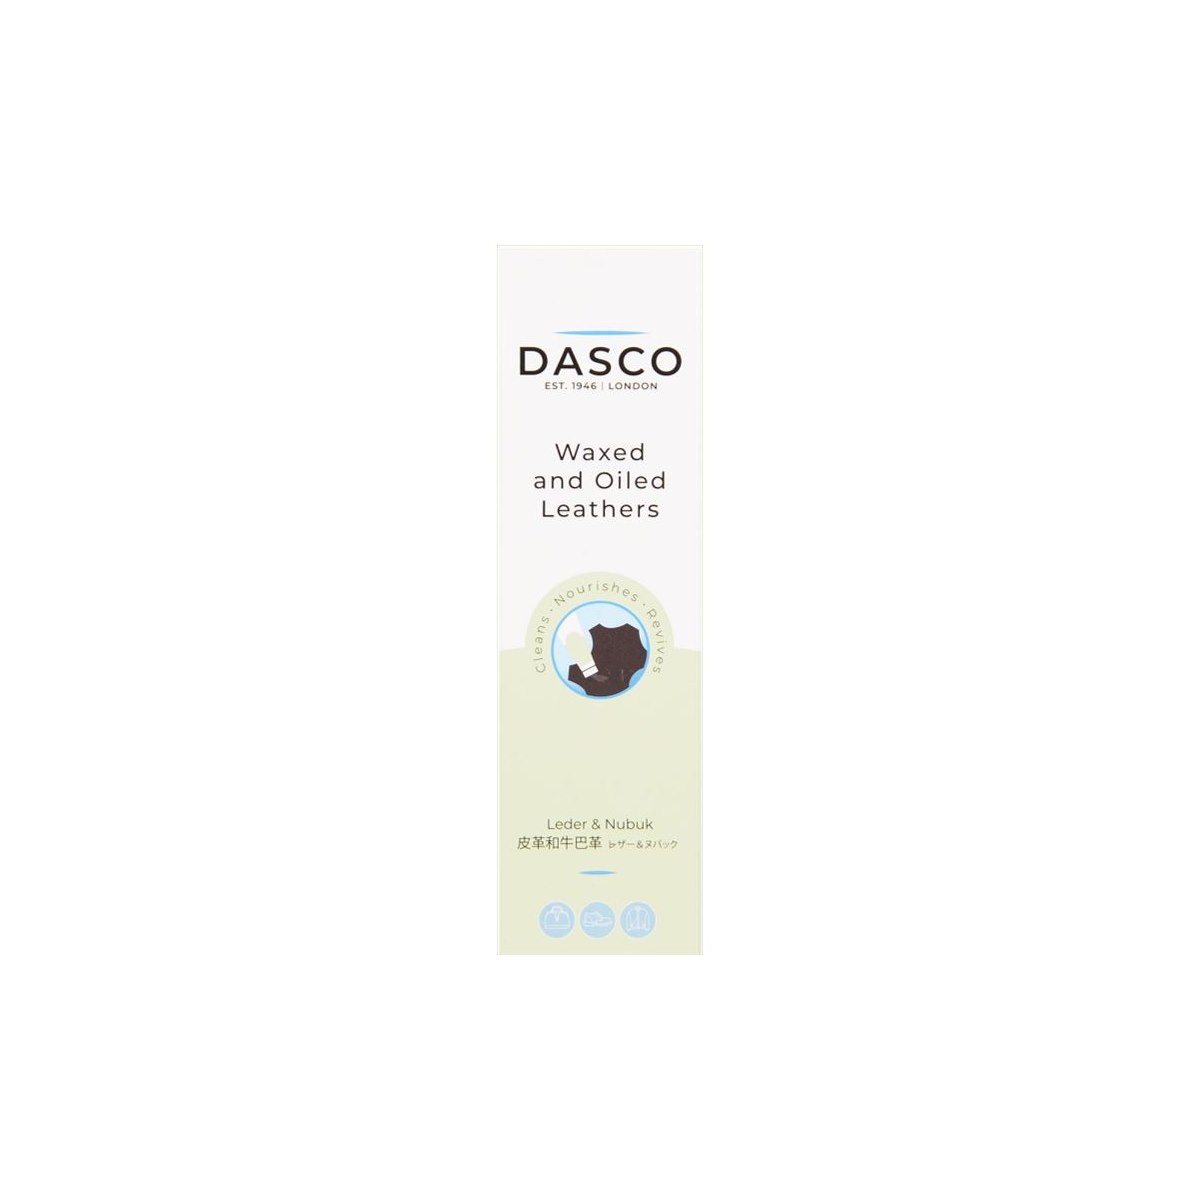 Dasco Waxed and Oiled Leathers 75ml